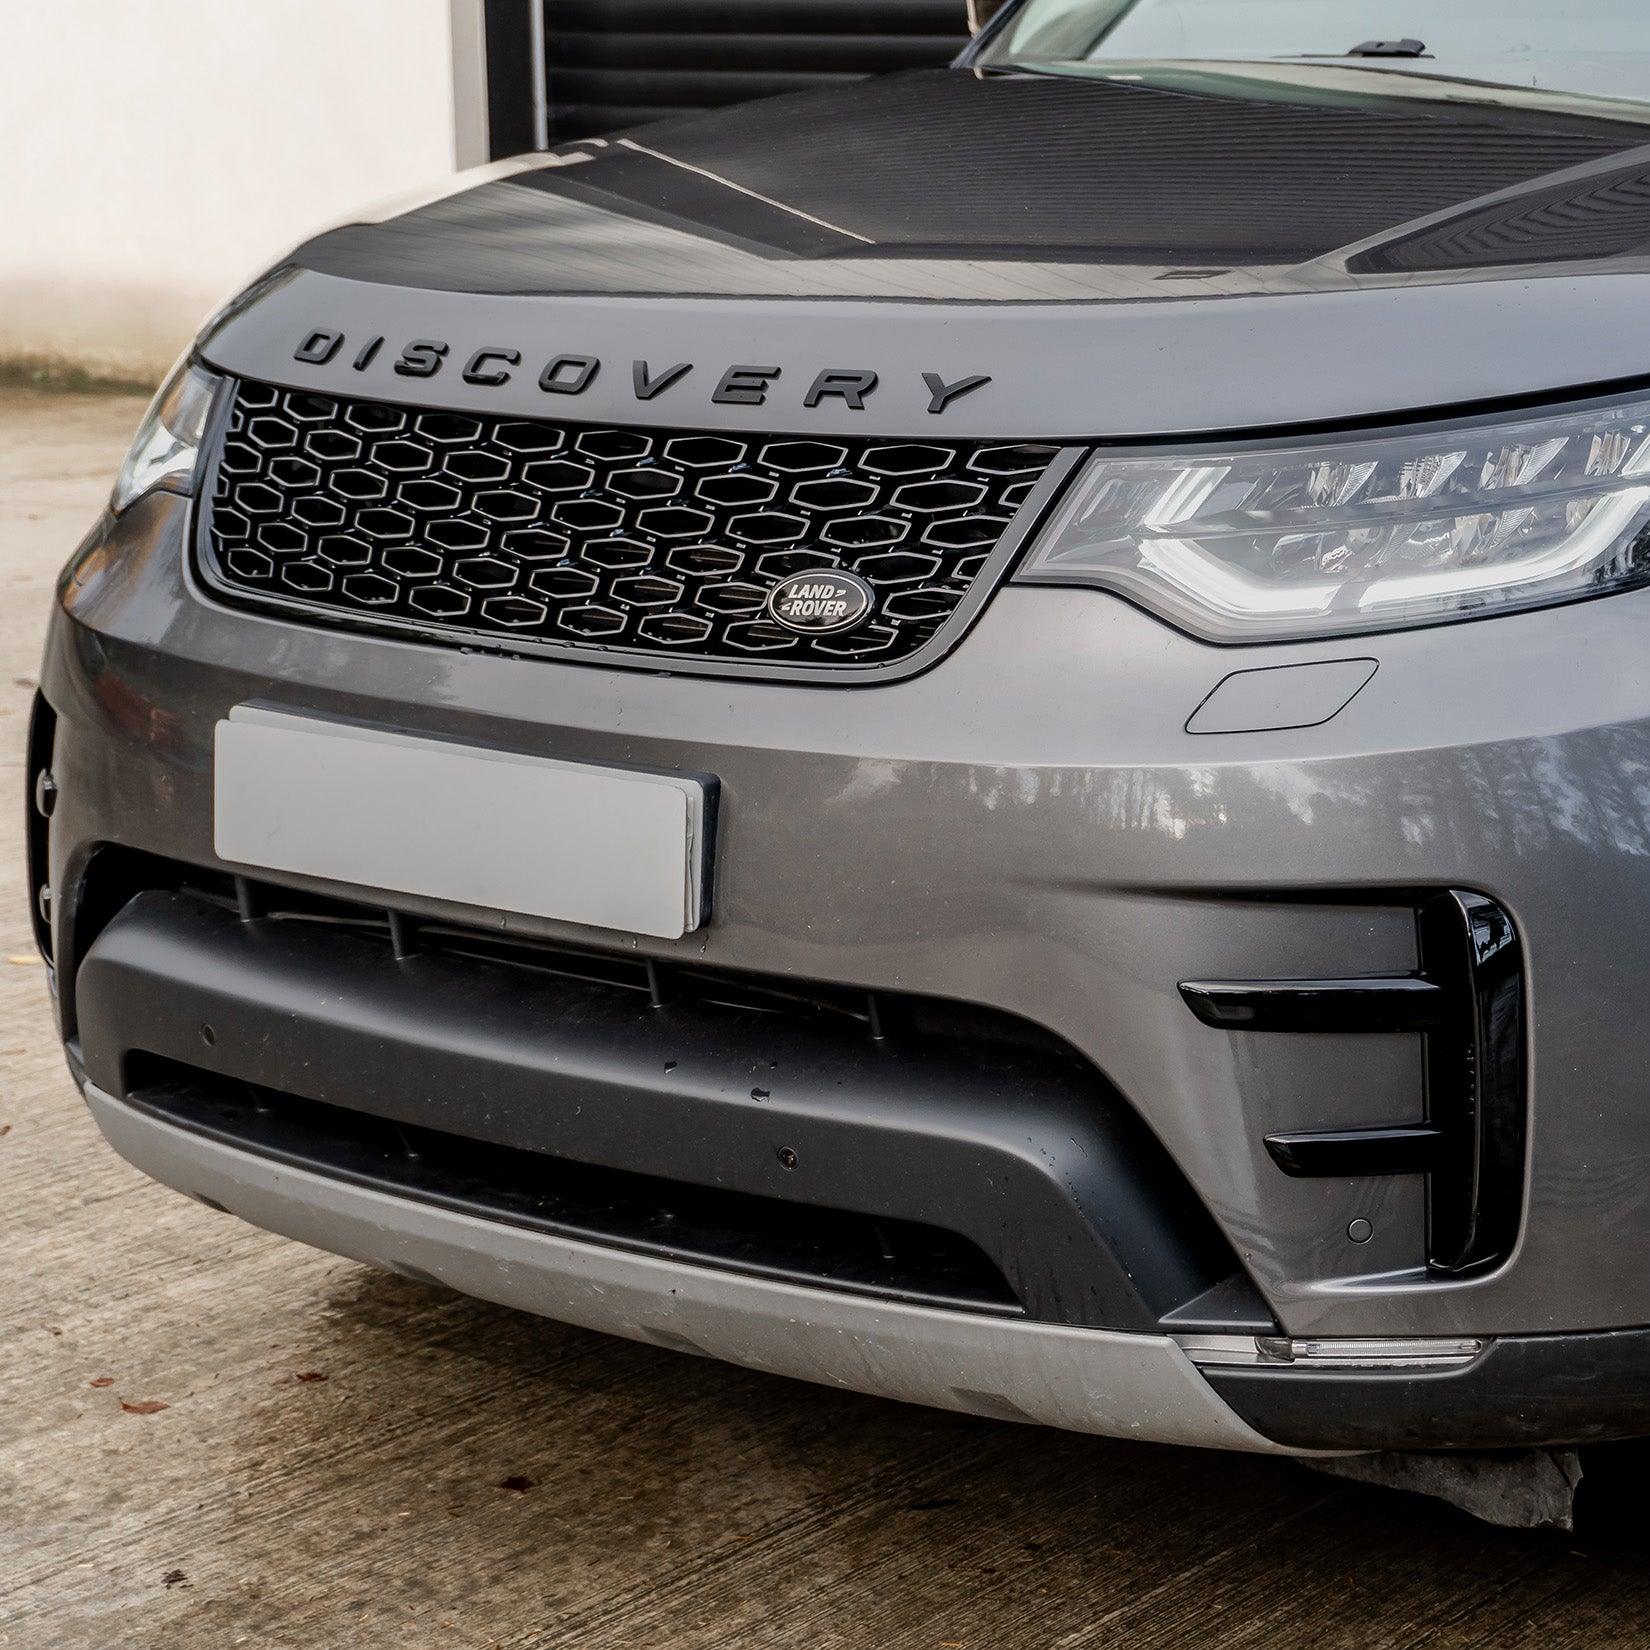 LAND ROVER DISCOVERY 5 - DYNAMIC BLACK EDITION BODY KIT - GRILLE, SIDE VENTS, TRIMS, TOW EYE AND EXHAUST COVERS - Storm Xccessories